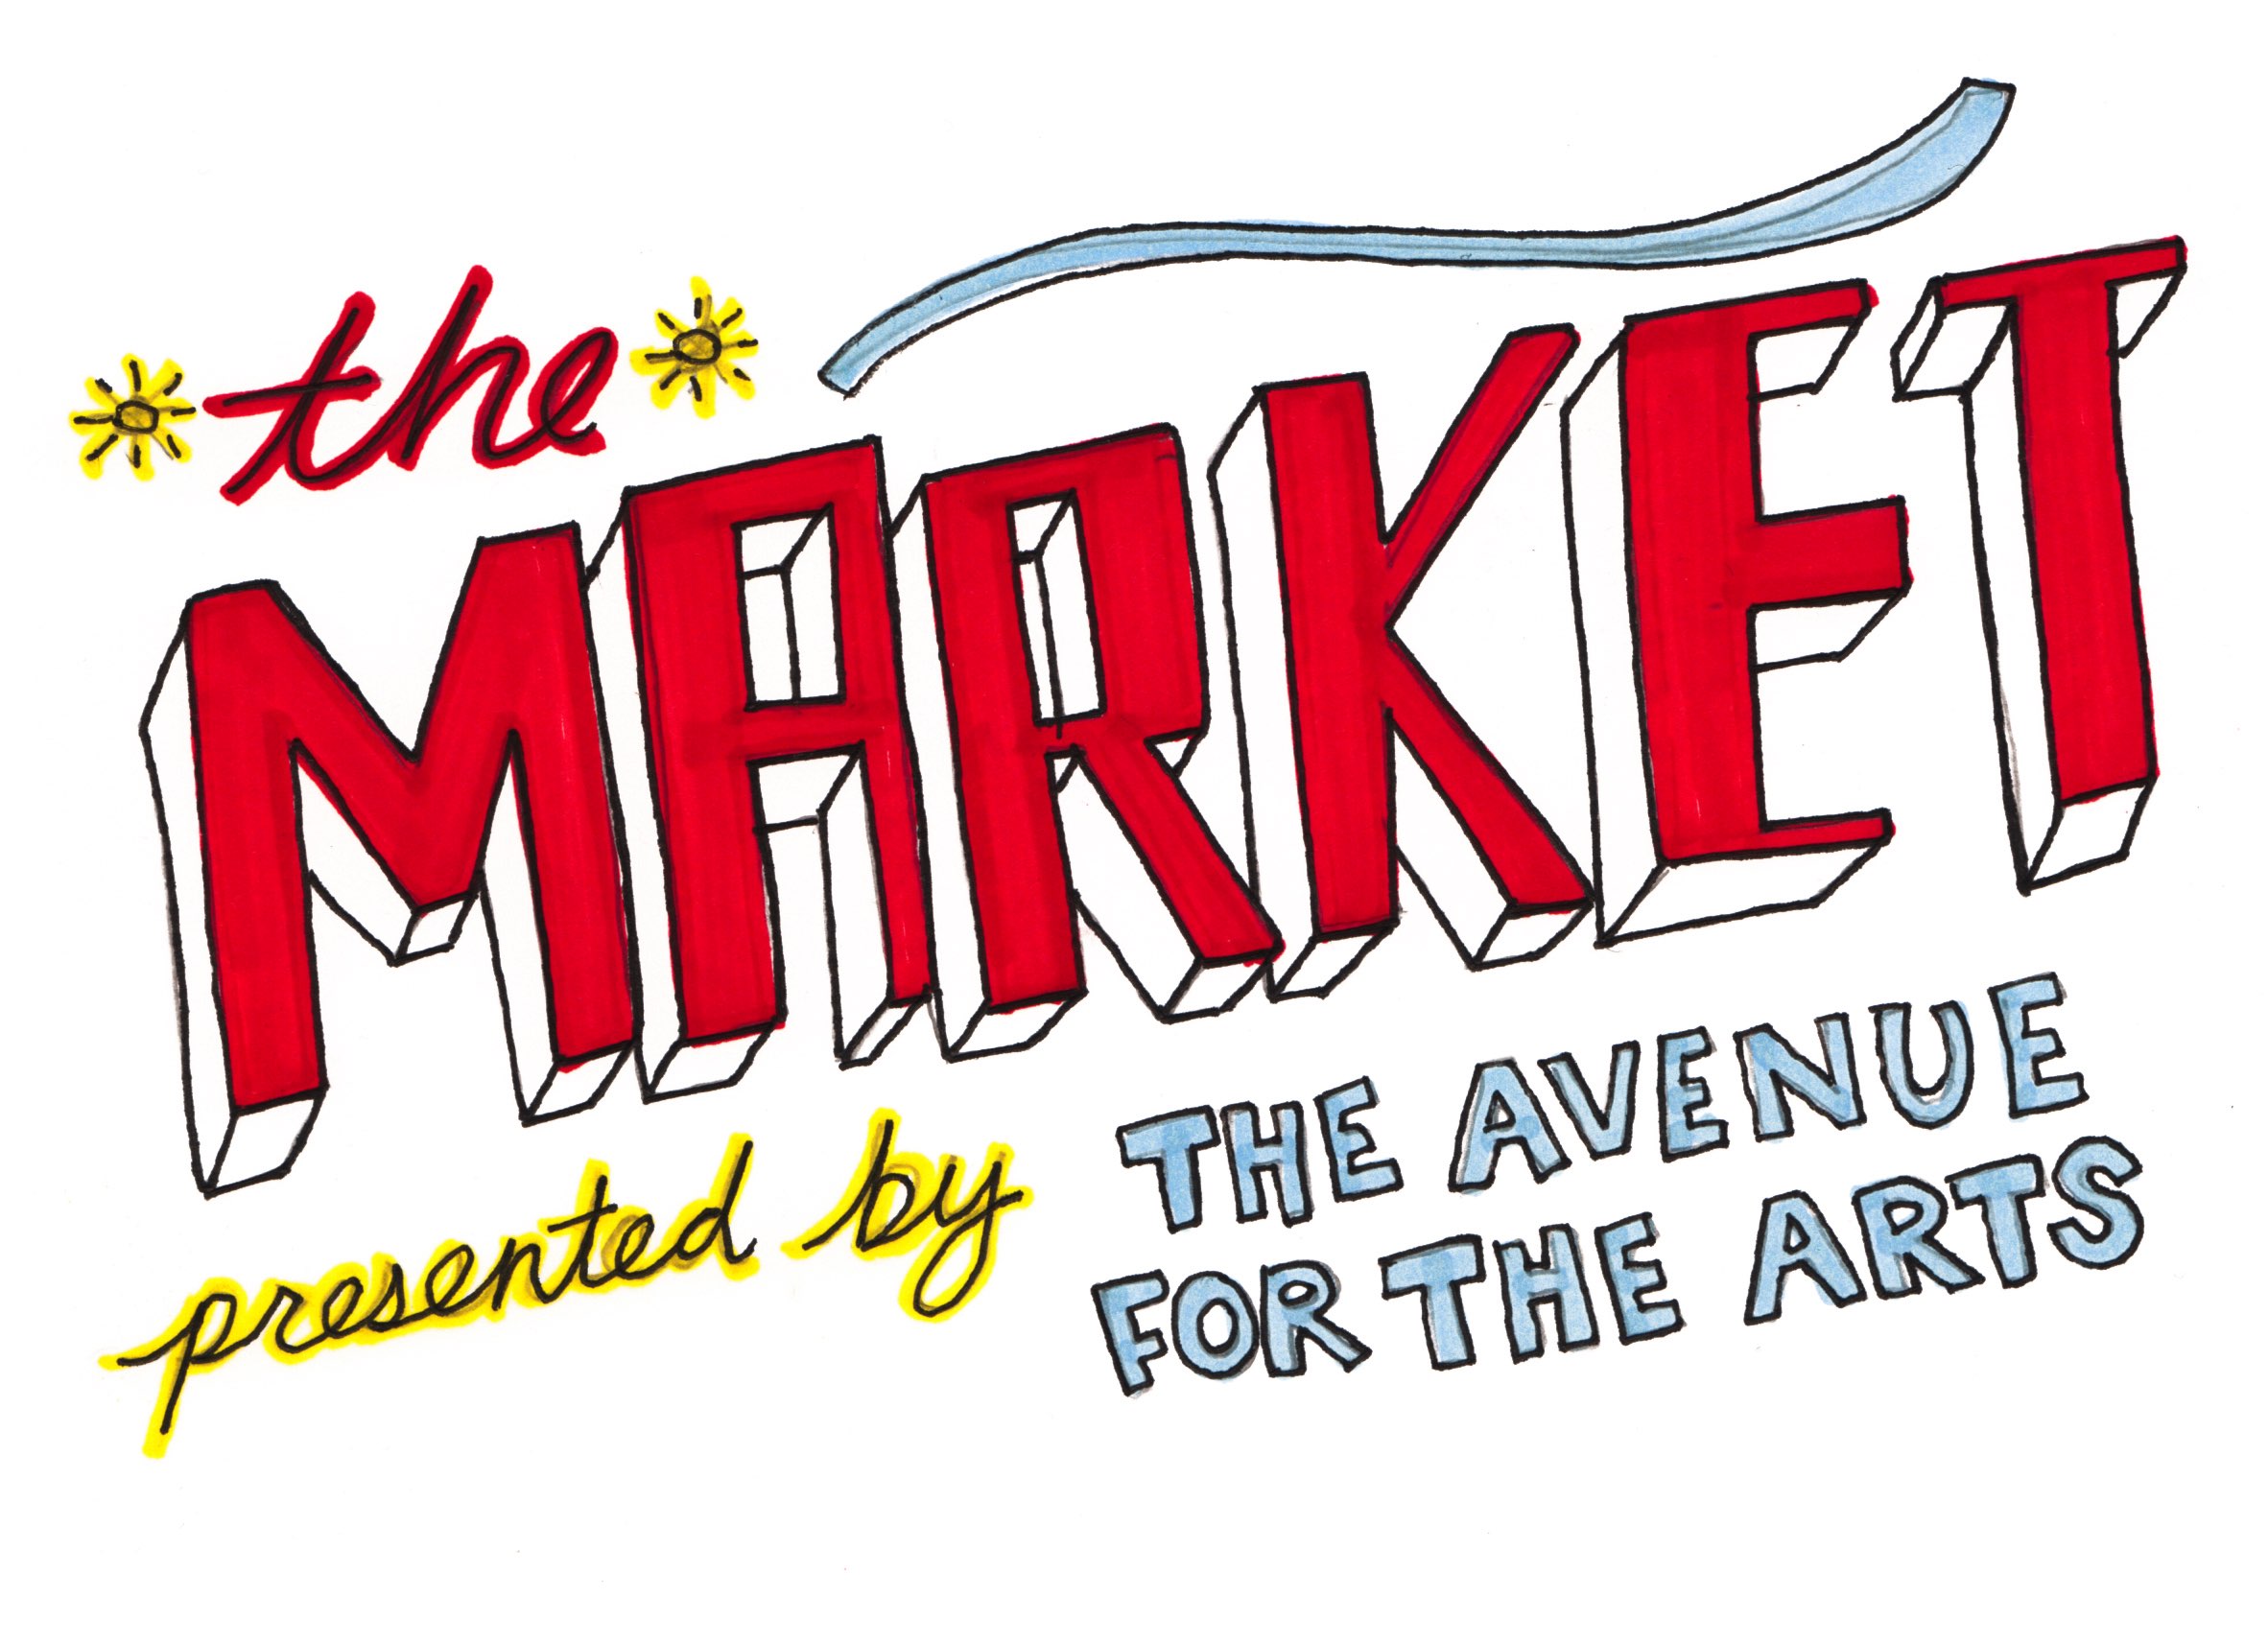 The Market presented by The Avenue for The Arts